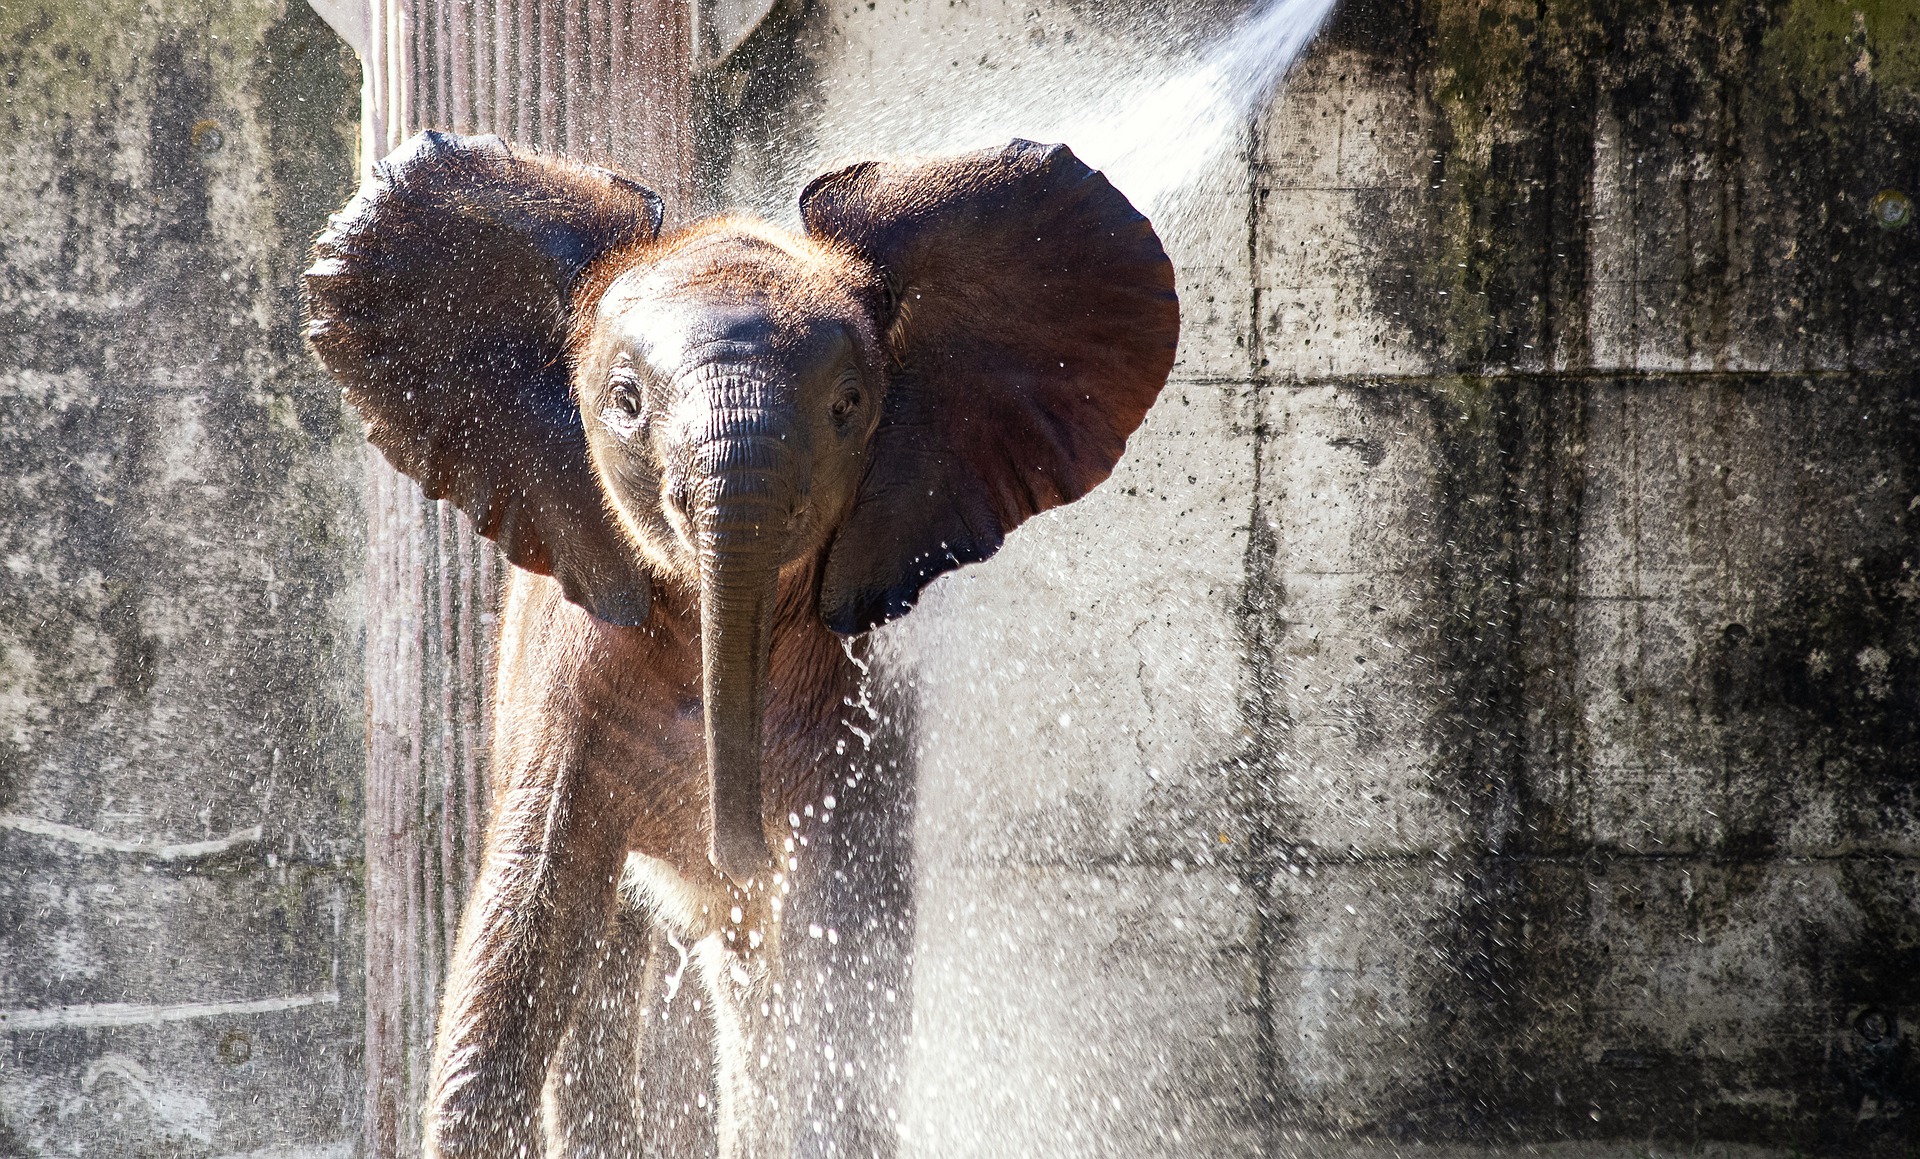 elephant takes a shower under running water